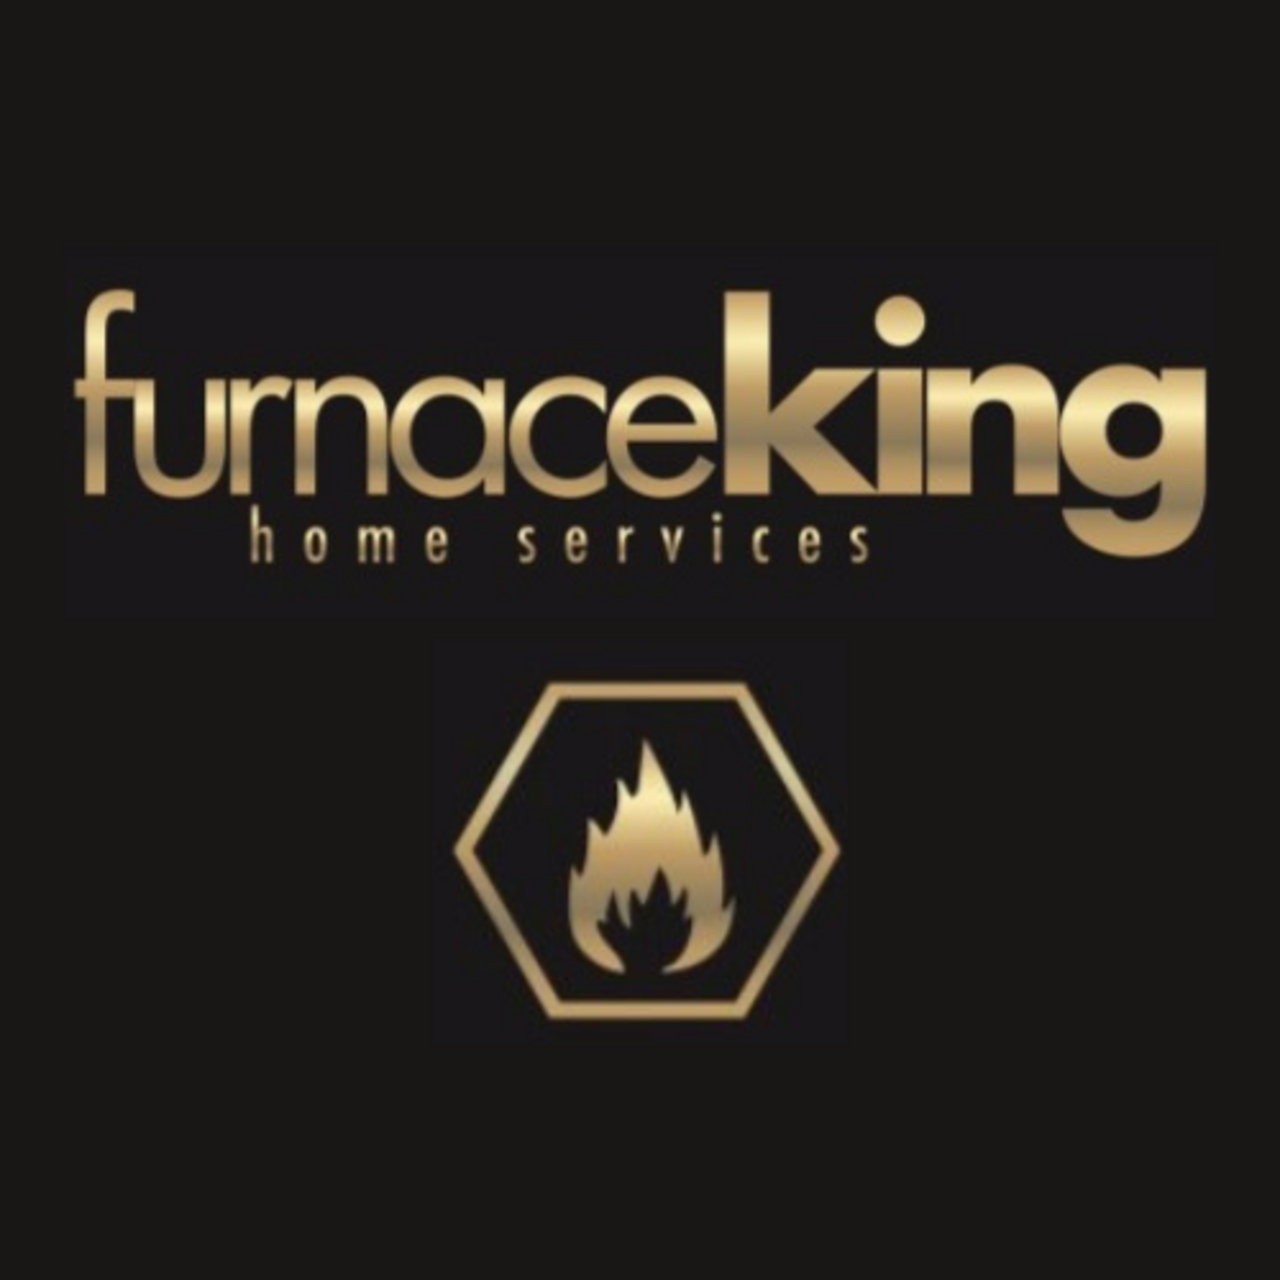 Furnace King Home Services's logo